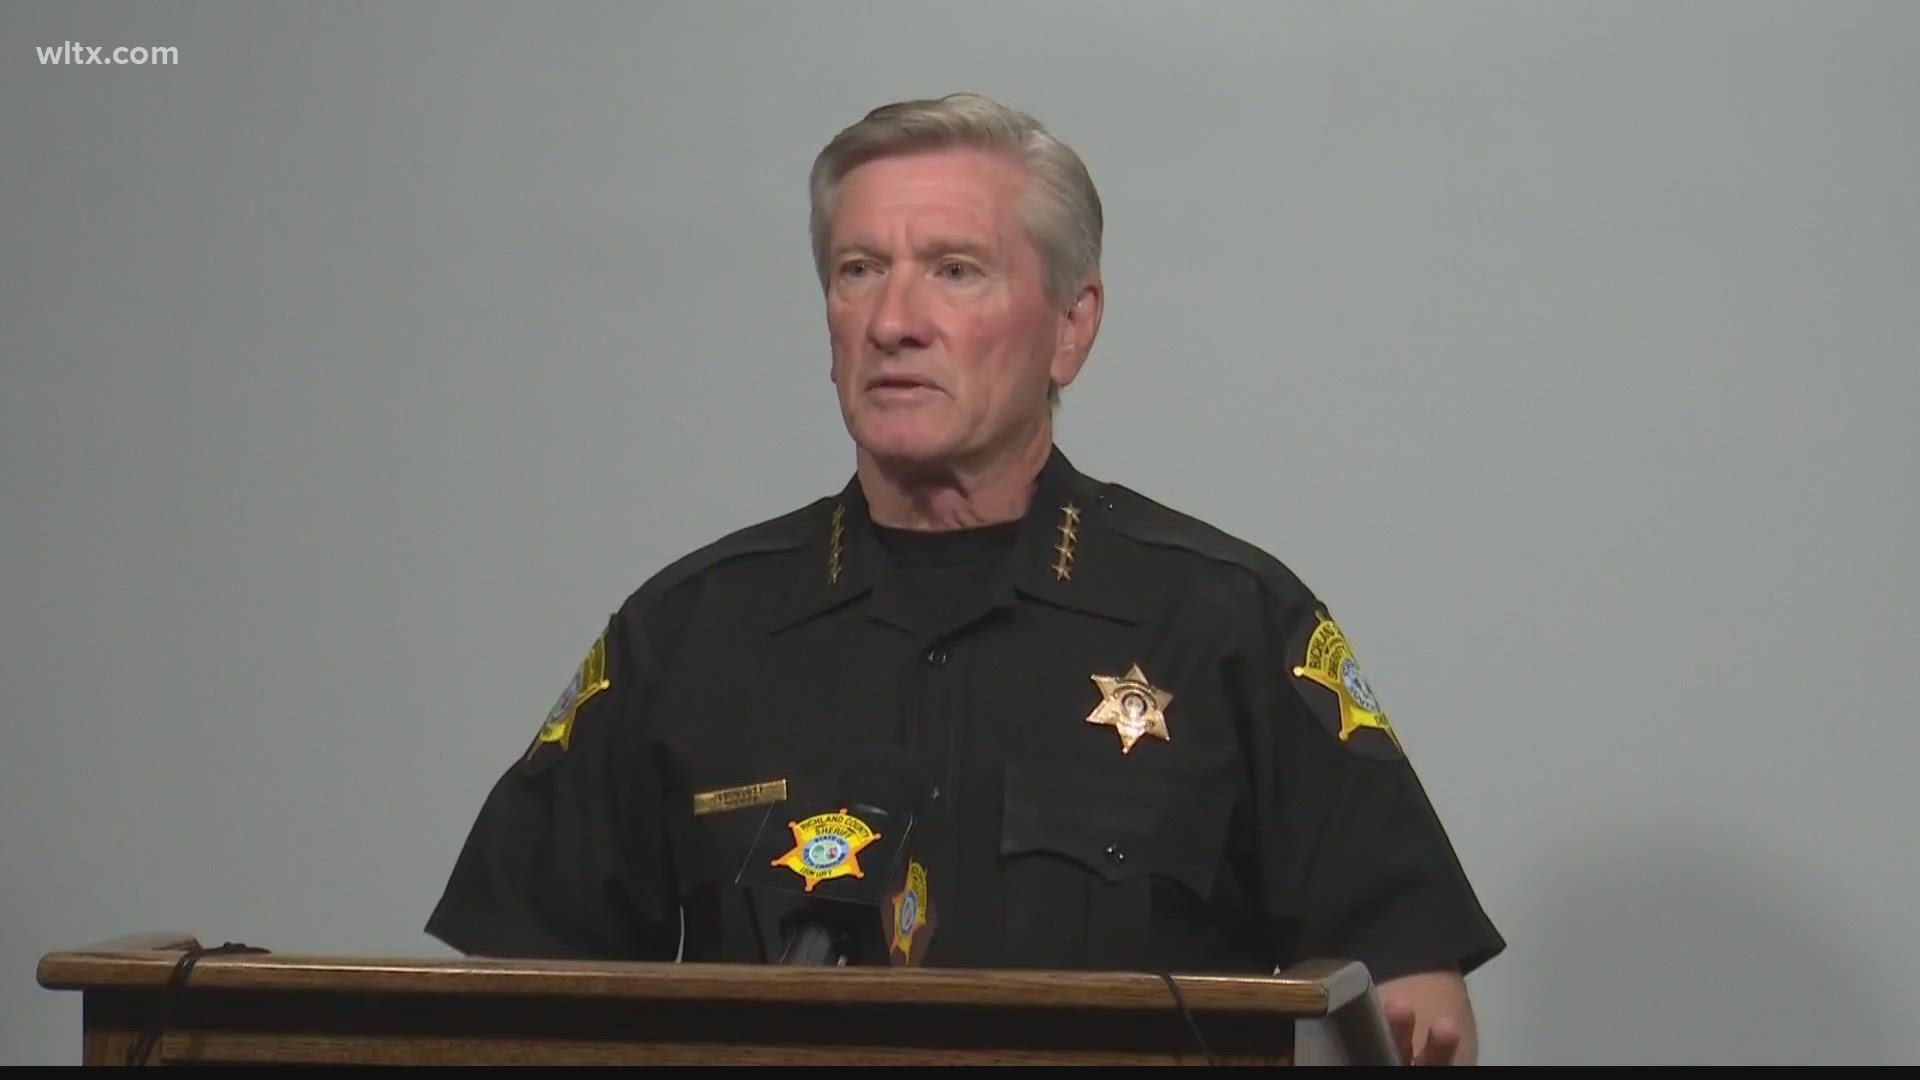 The sheriff also provided a general update on the conditions of the victims, suggesting that they are expected to survive - but still have recovery ahead.